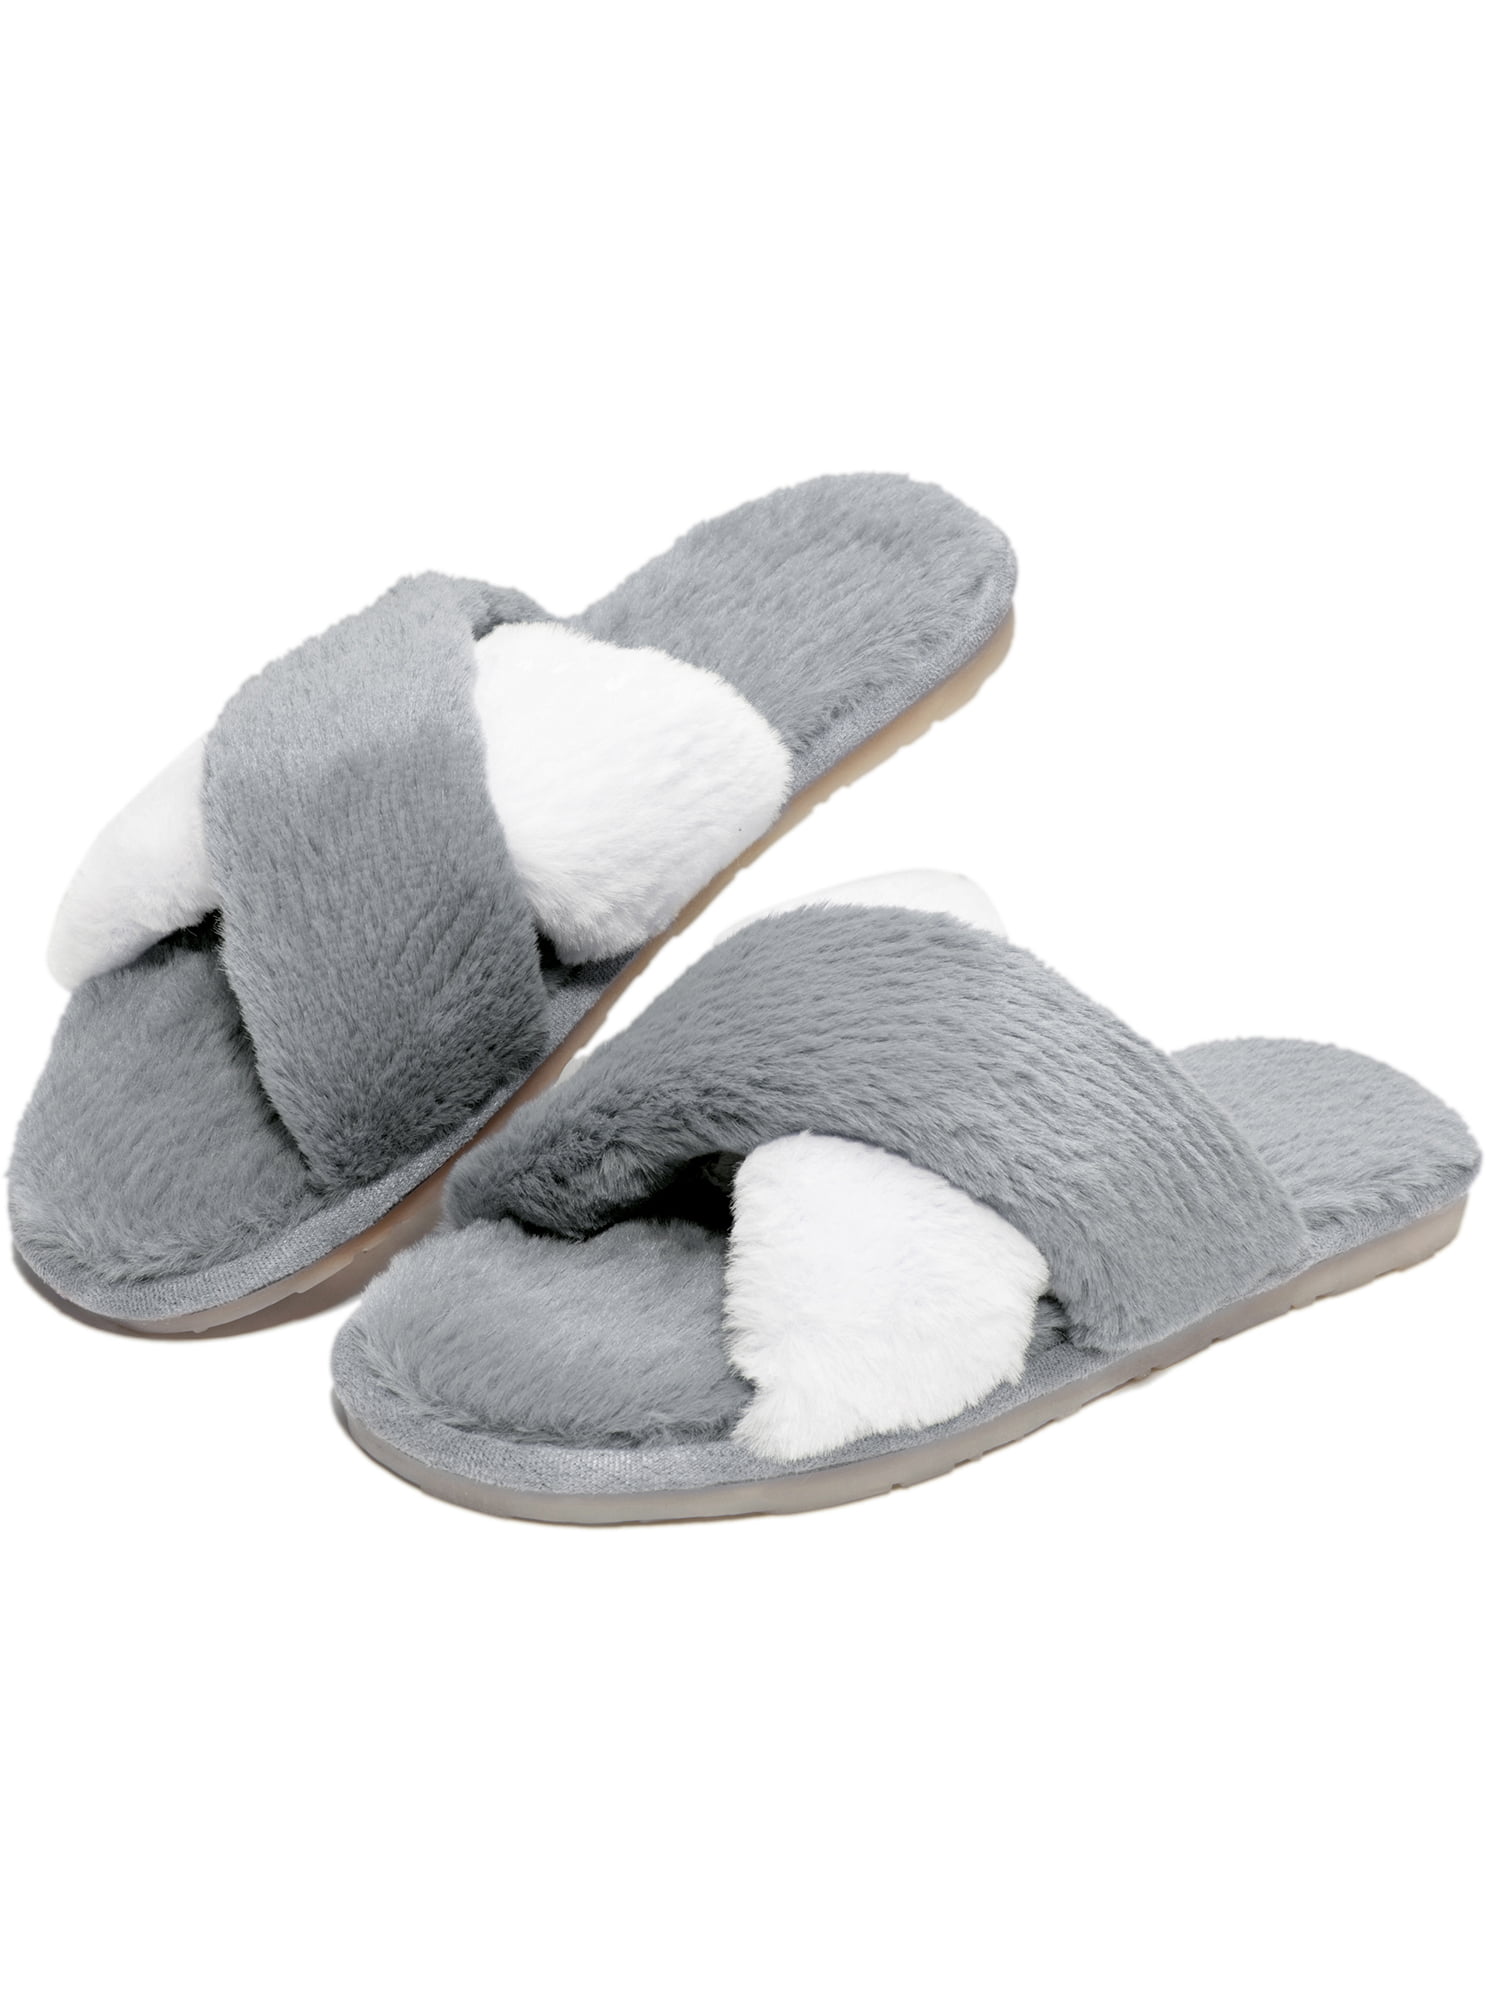 Cozy Fuzzy Slippers for Women Open Toe Breathable Memory Foam Fluffy  Bedroom Spa House Slippers Soft Plush Fur Cross Band Slip-on House Shoes  Idoor 